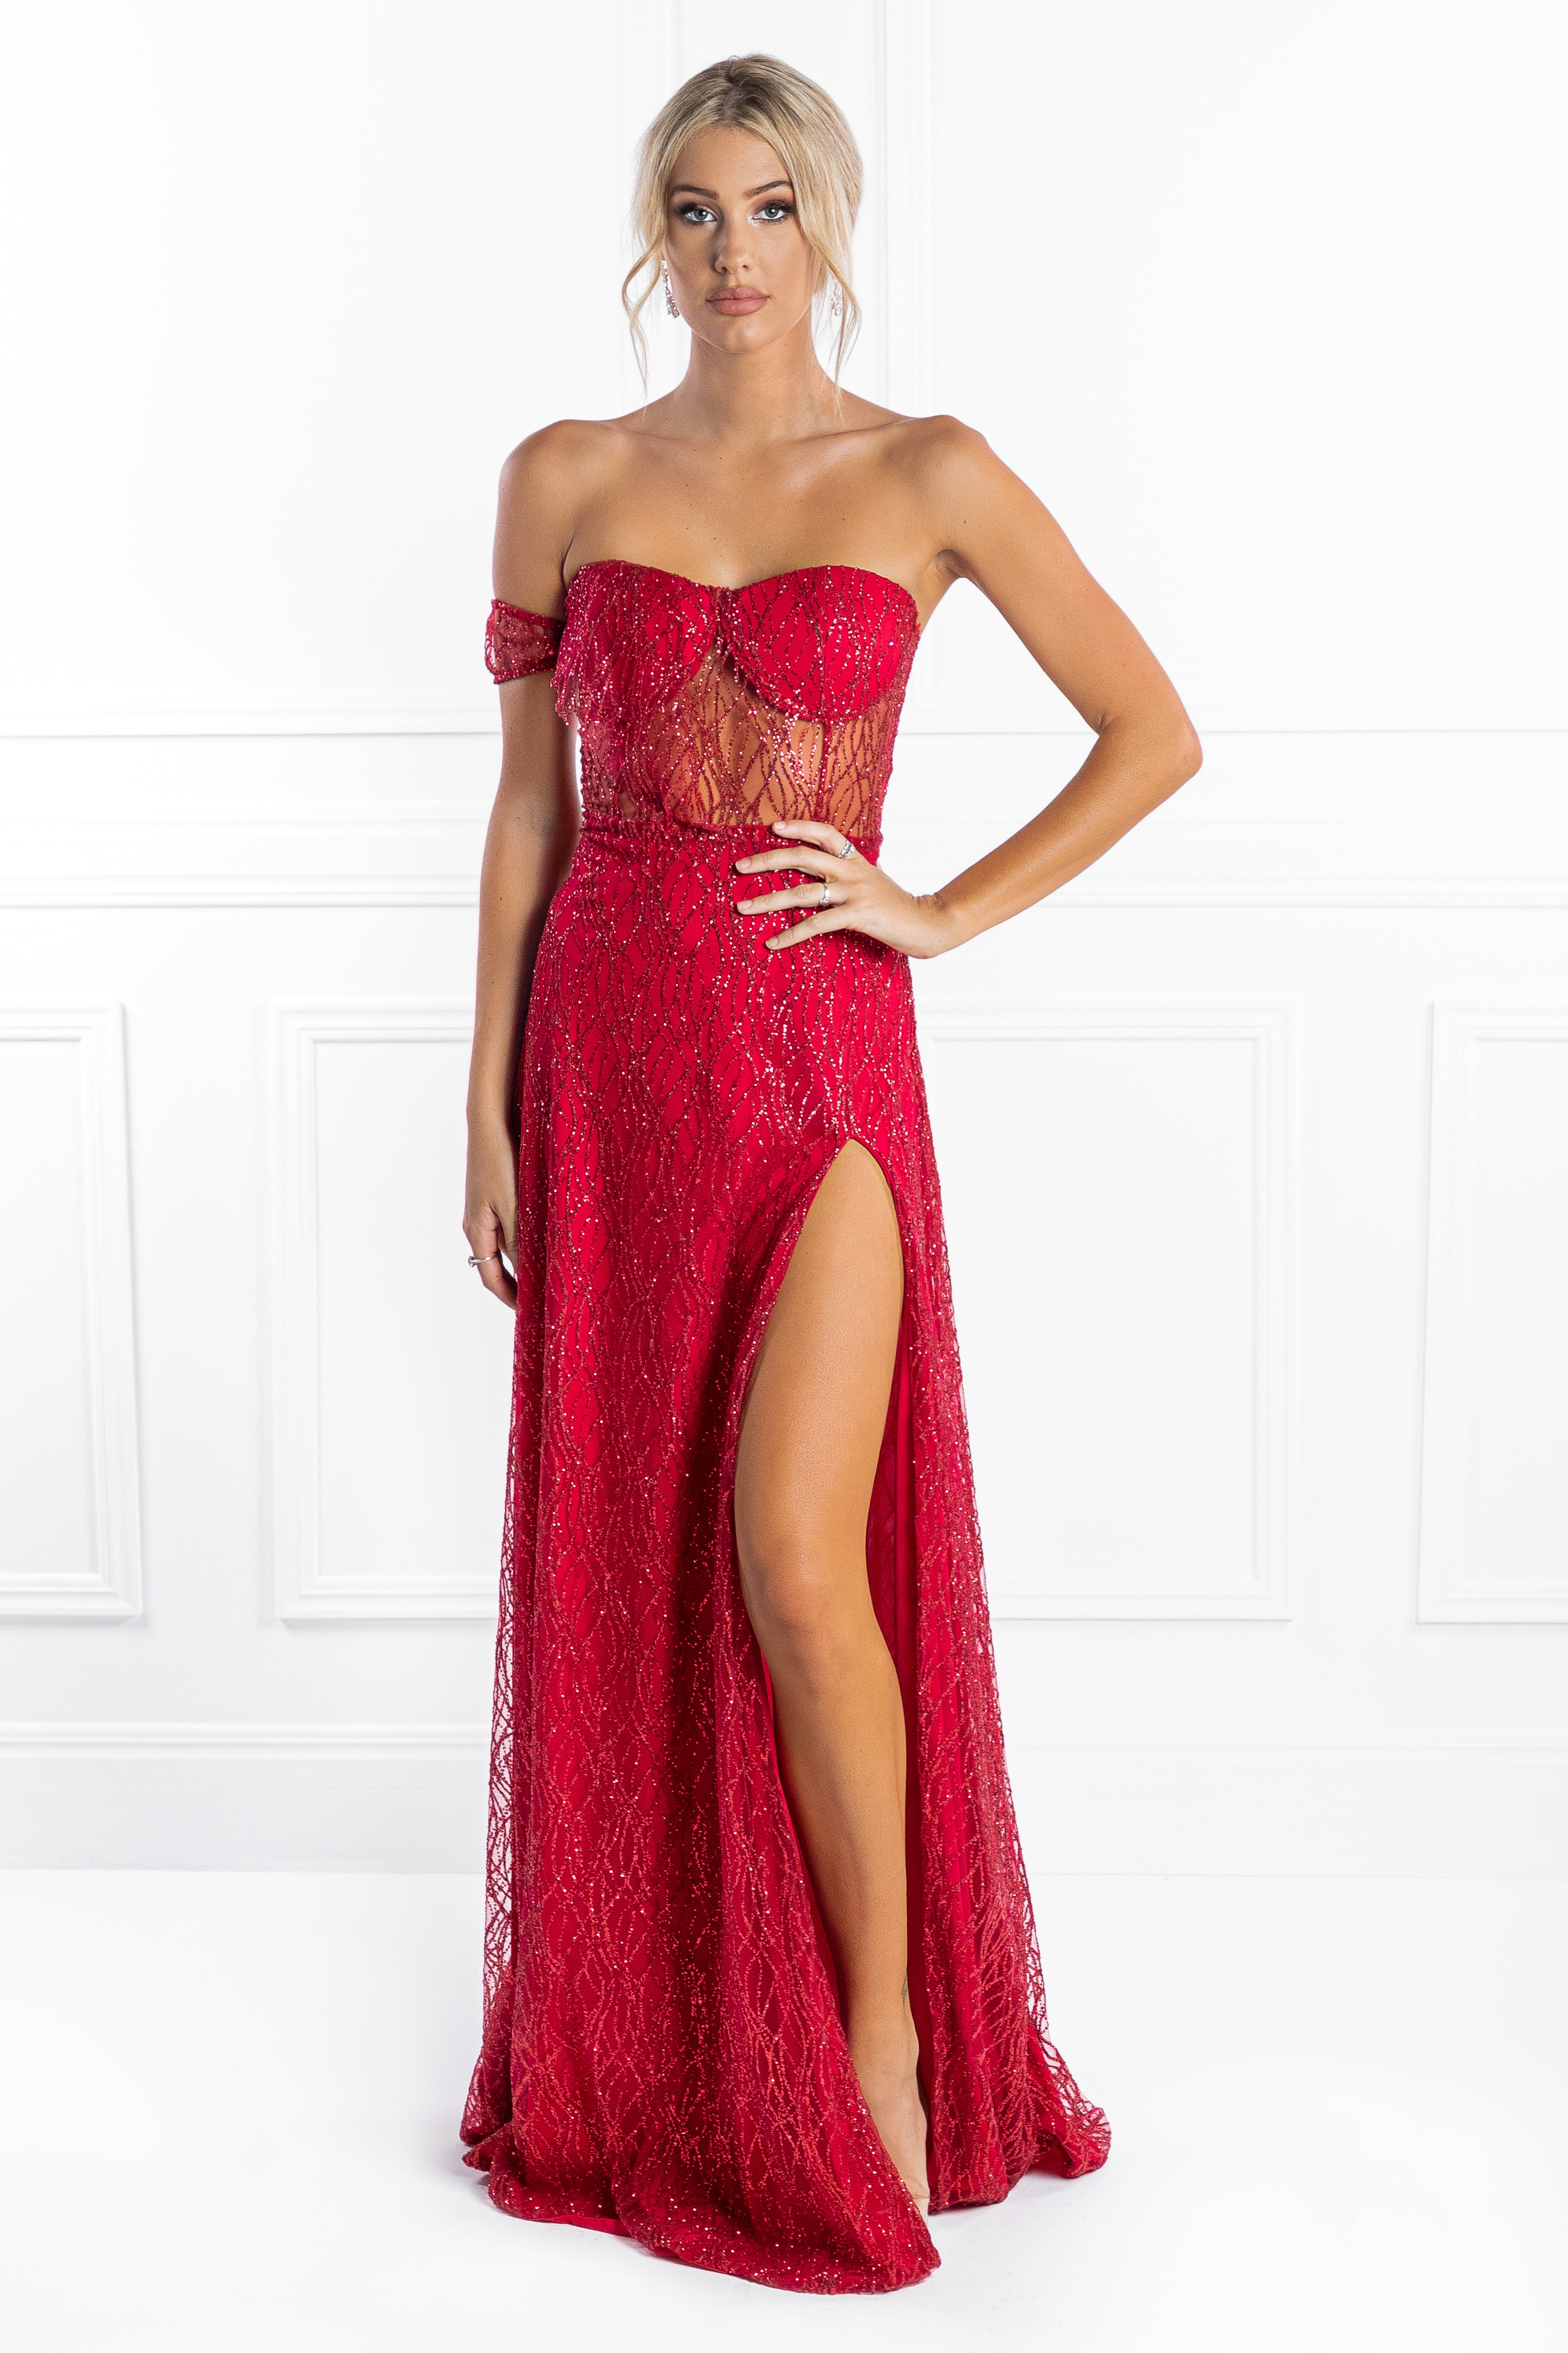 Honey Couture MARA Red Glitter One Sleeve Evening Gown Dress Honey Couture$ AfterPay Humm ZipPay LayBuy Sezzle